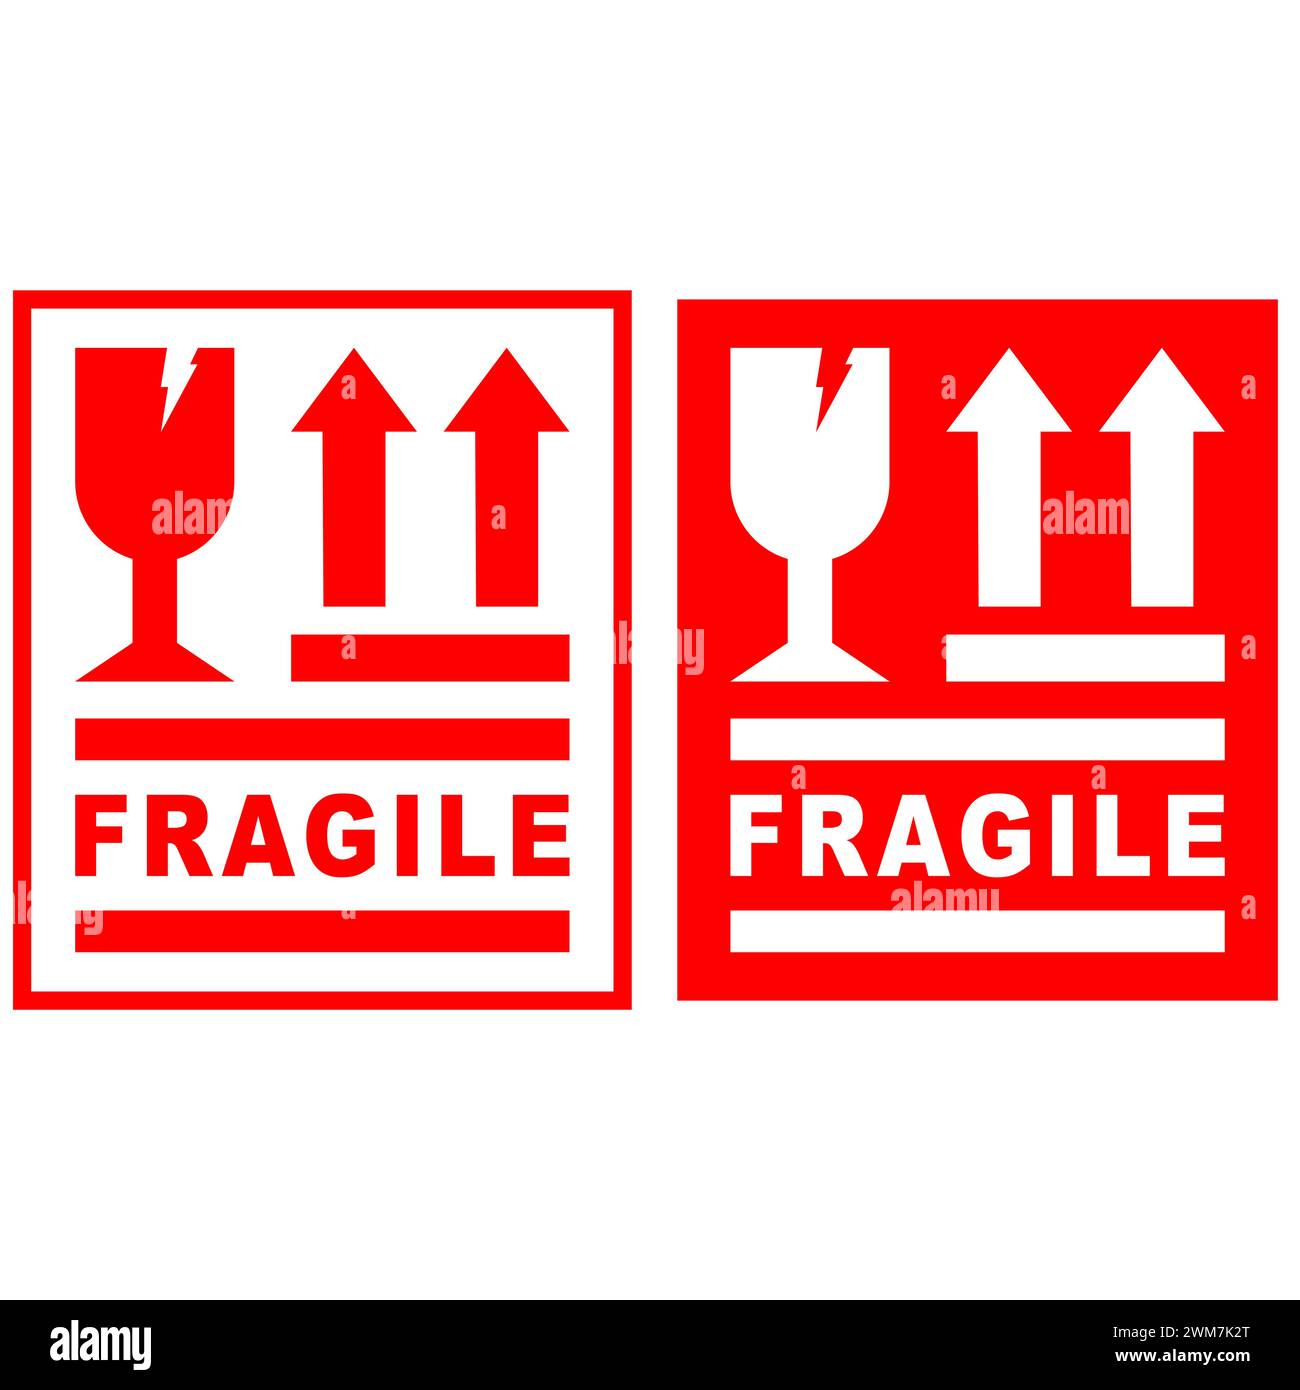 Packaging label fragile. Red sign fragile vector. Shipping or Packaging Stickers Illustration. Stock Vector